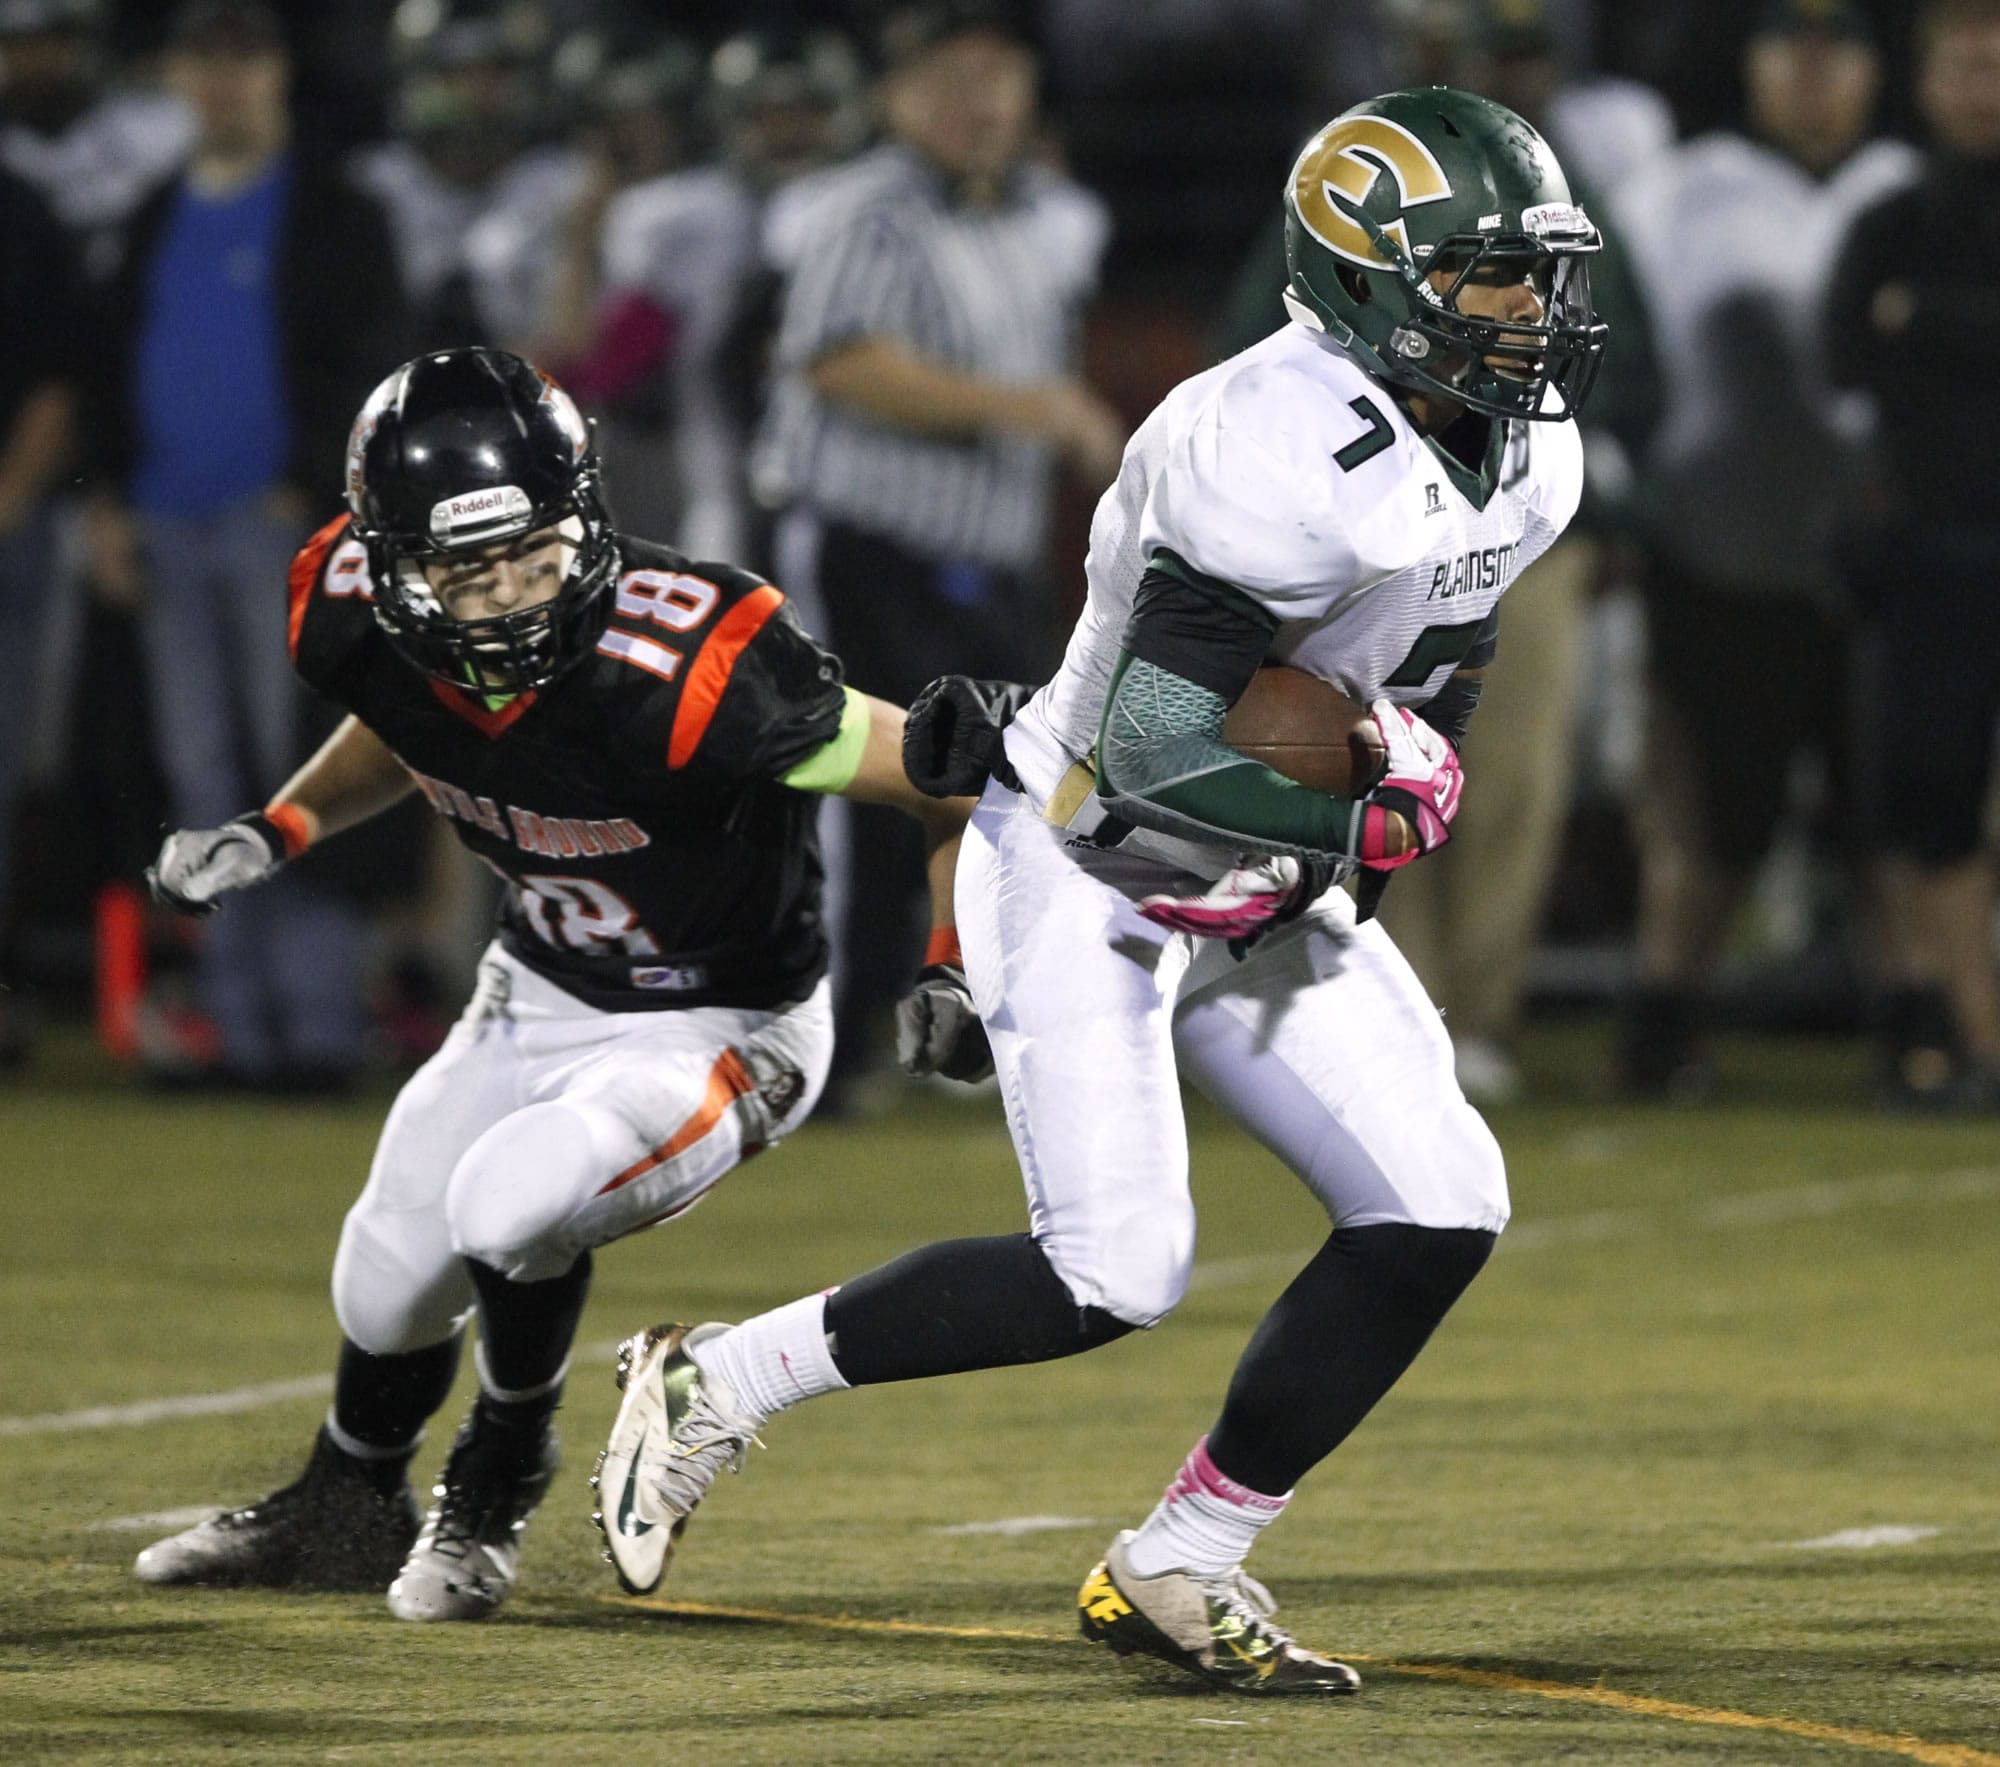 Evergreen running back Rey Green (7) escapes tackle by Battle Ground defensive back Josh Lemar in 4A GSHL opener.